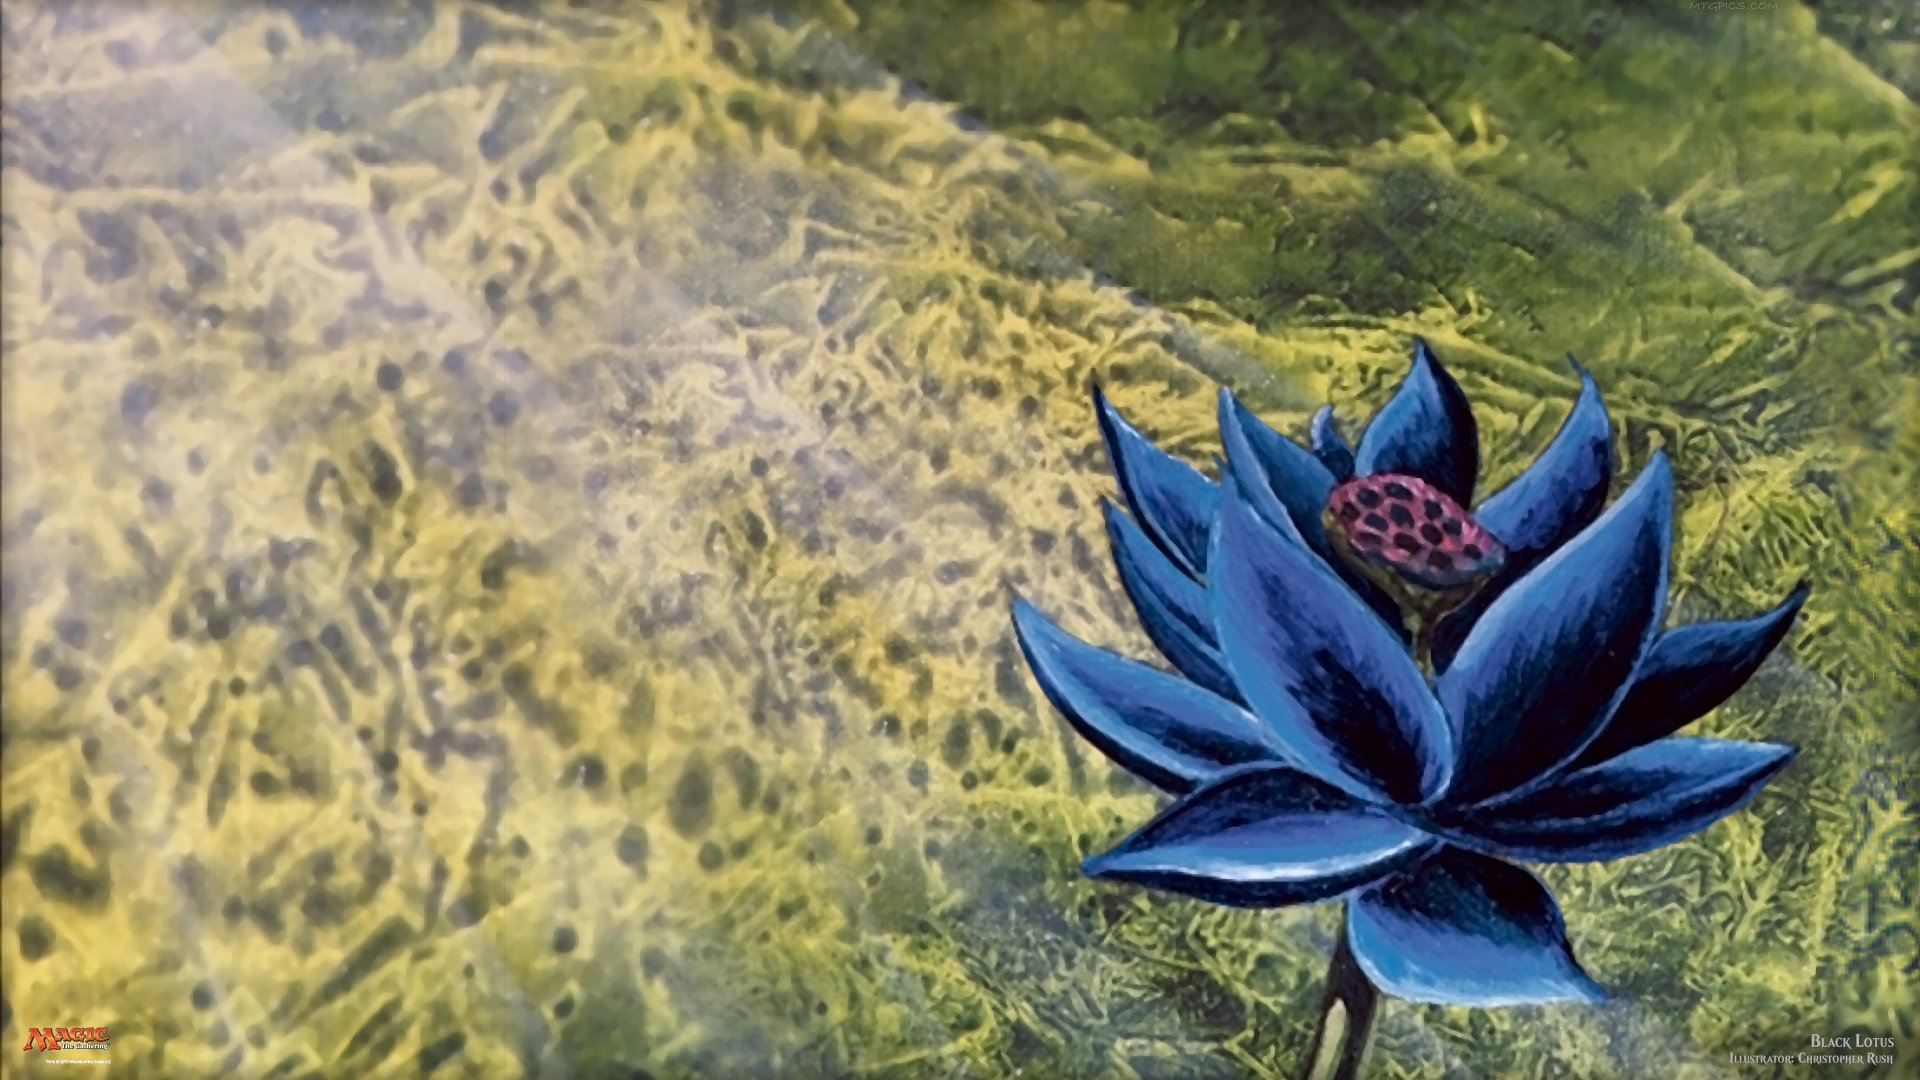 Signed Artist Proof Beta Black Lotus Sells For Over $600,000 At Auction